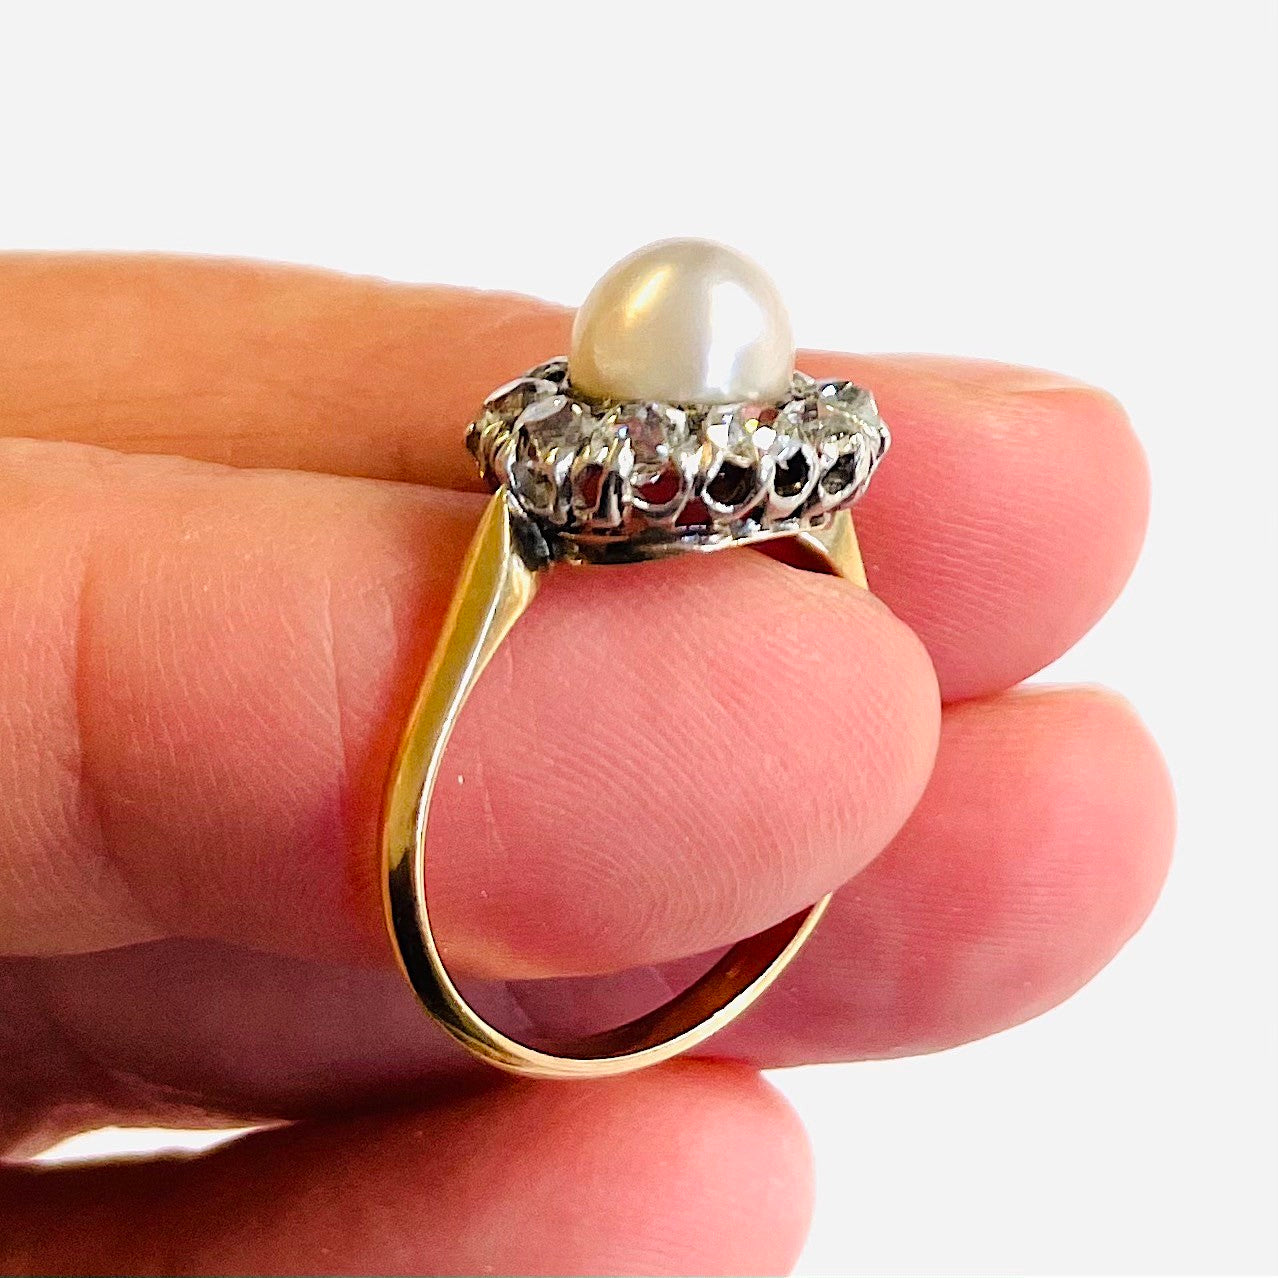 Victorian Silver & 18KT Yellow Gold Natural Pearl & Diamond Ring in hand